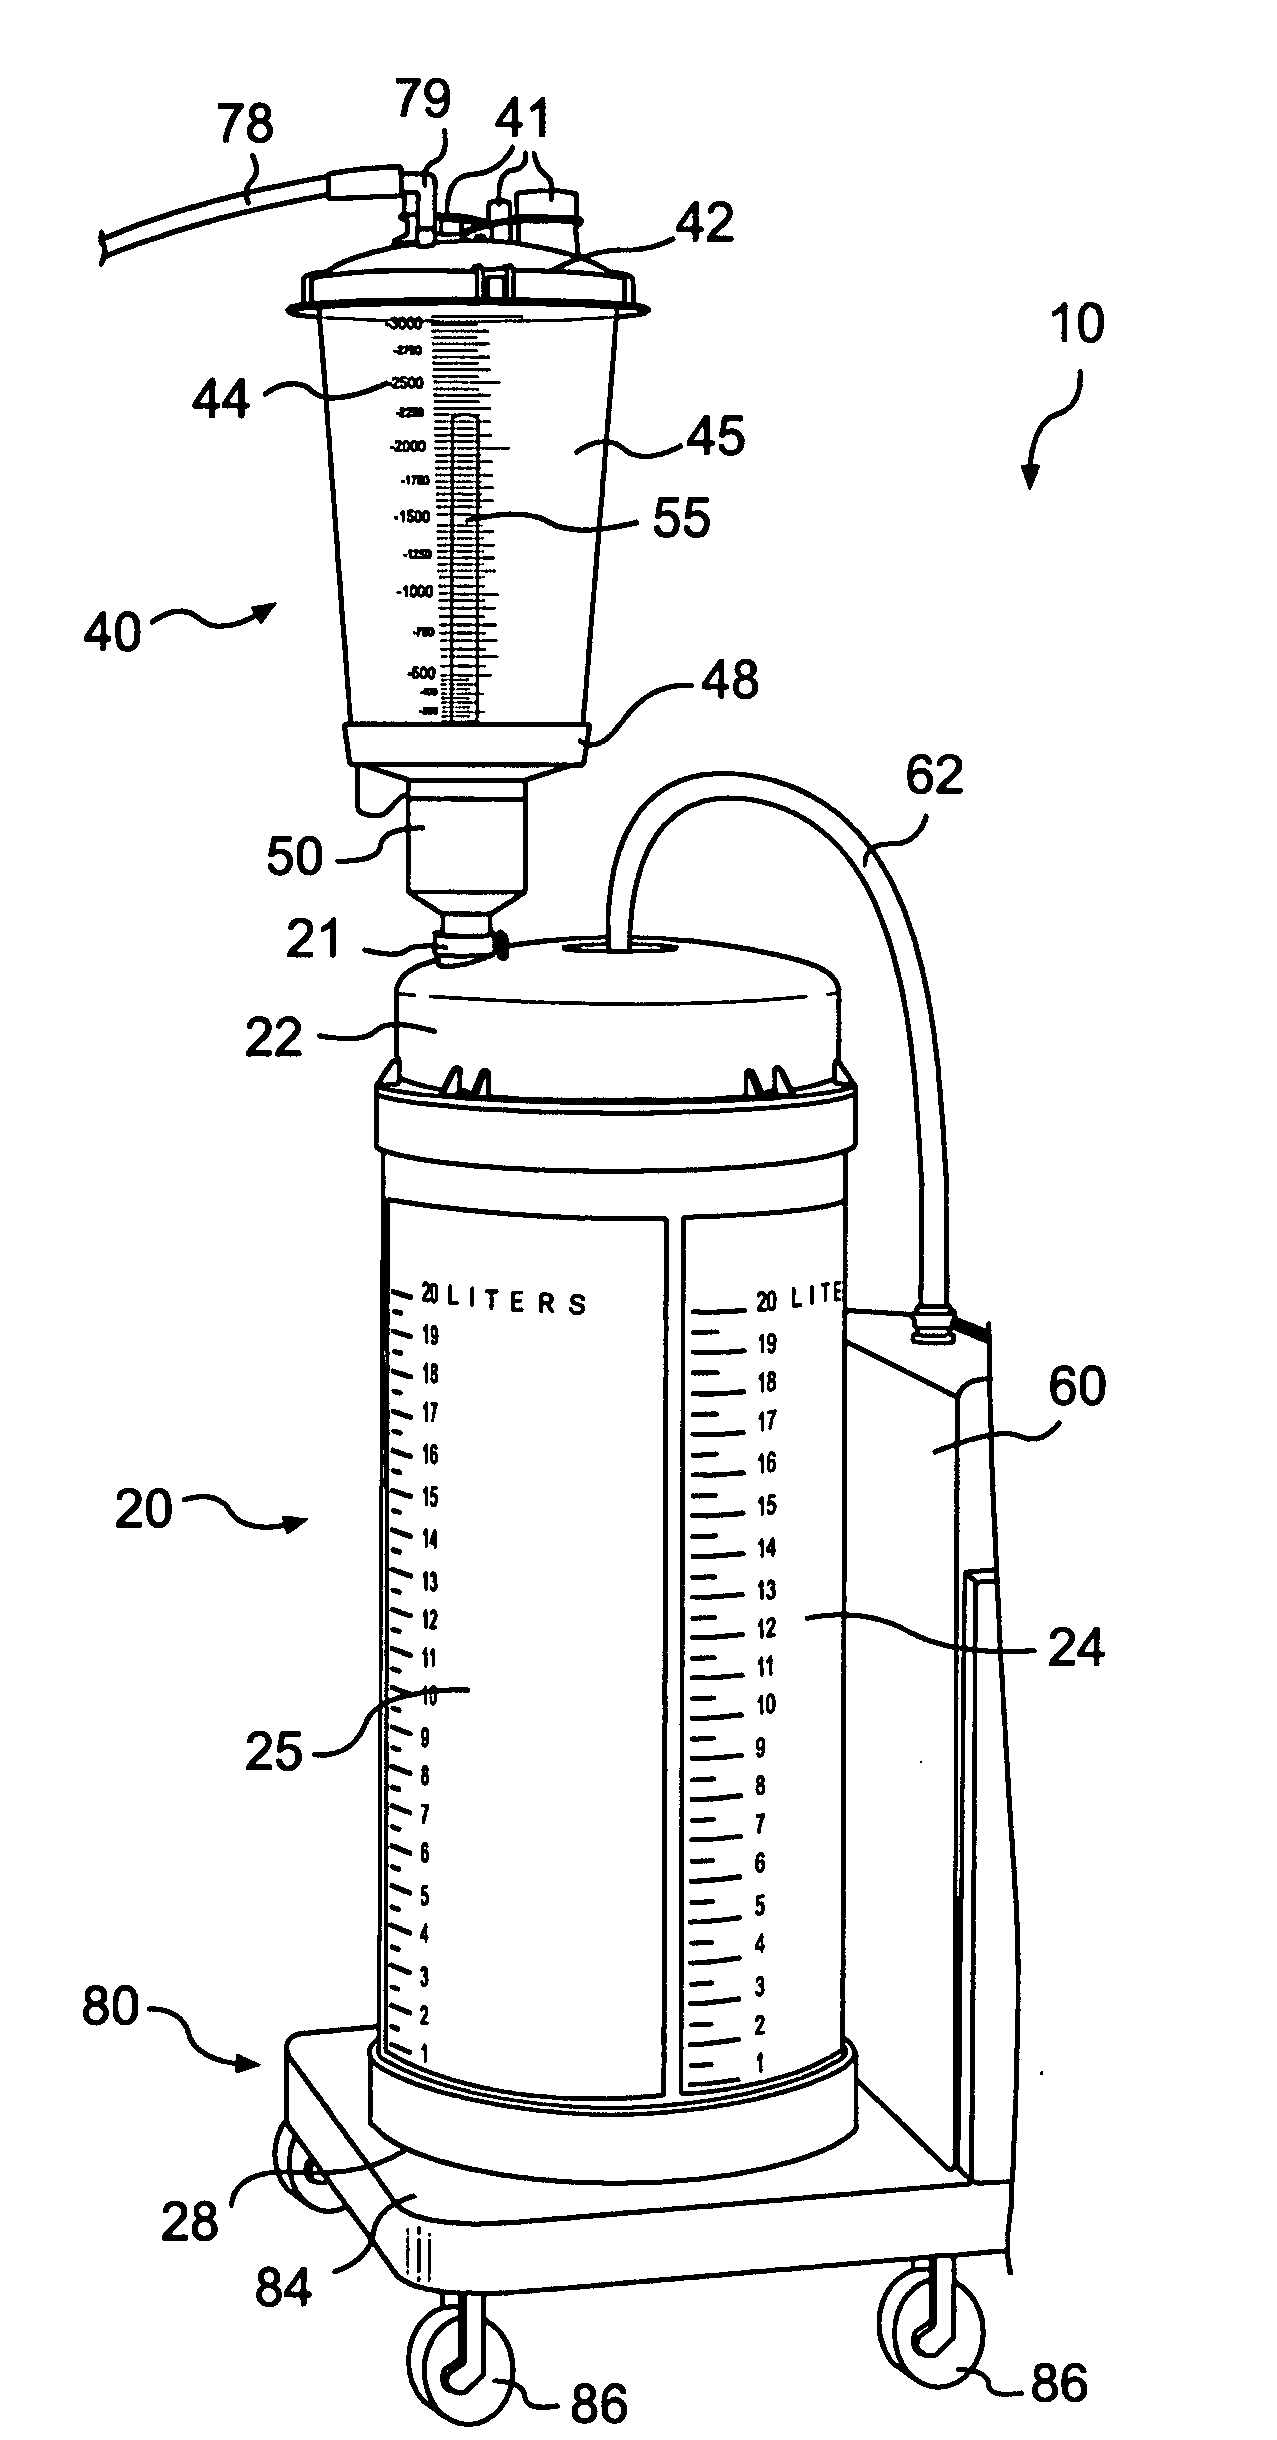 Liquid collection system and related methods